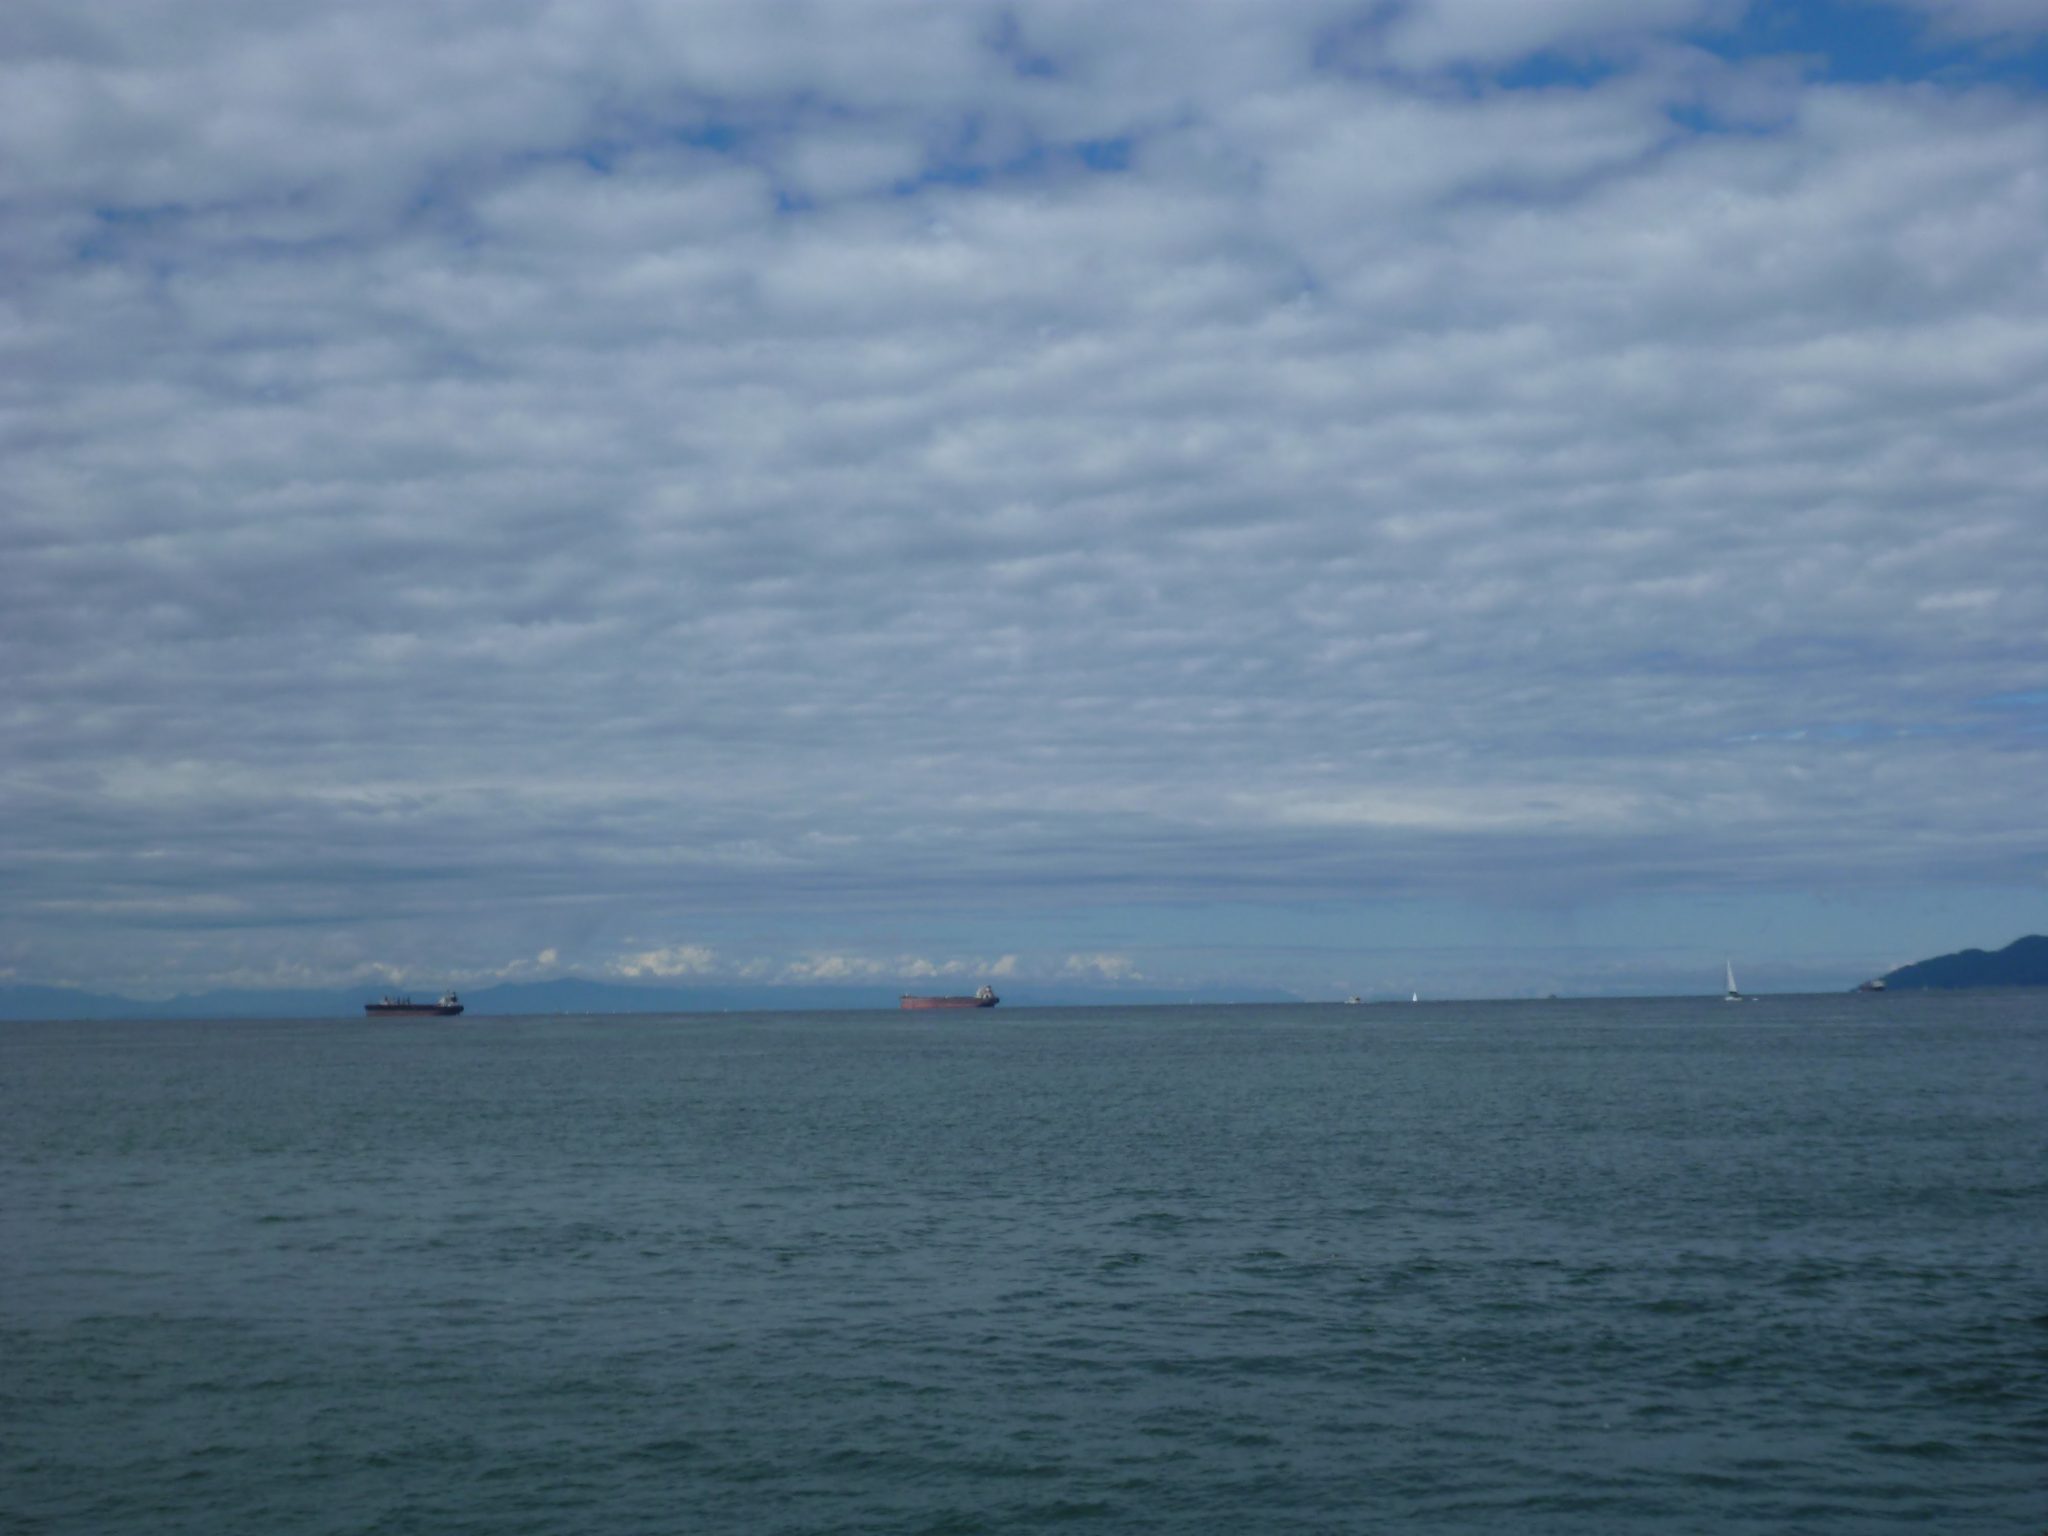 Two container ships are anchored off the coast. Their are puffy white clouds and forested hillsides in the distance.